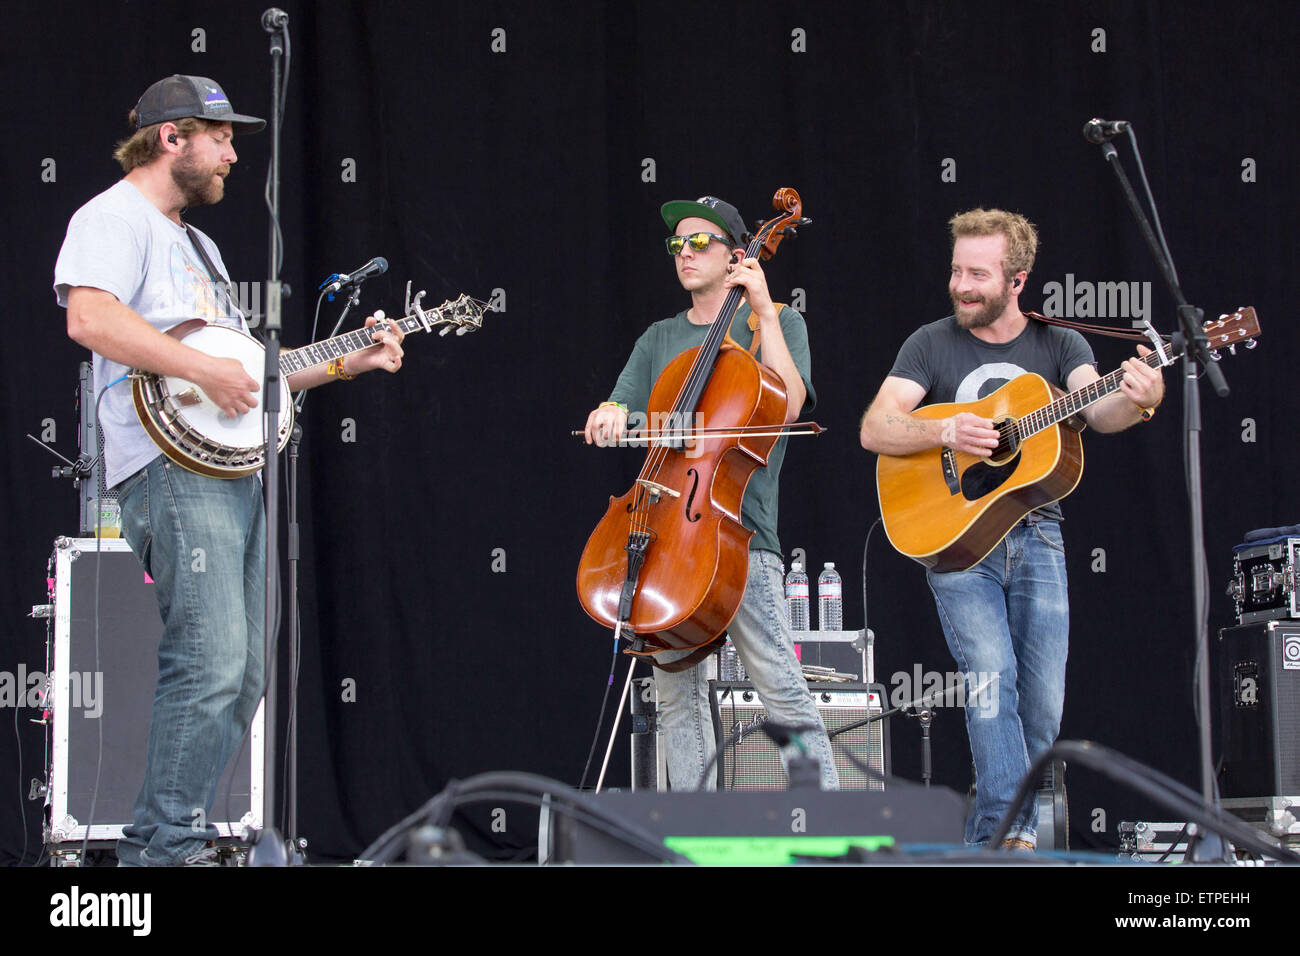 June 13, 2015 - Manchester, Tennessee, U.S - DAVE CARROLL (L) and DAVE SIMONETT (R) of Trampled by Turtles perform live on stage at the Bonnaroo Arts and Music Festival Manchester, Tennessee (Credit Image: © Daniel DeSlover/ZUMA Wire) Stock Photo